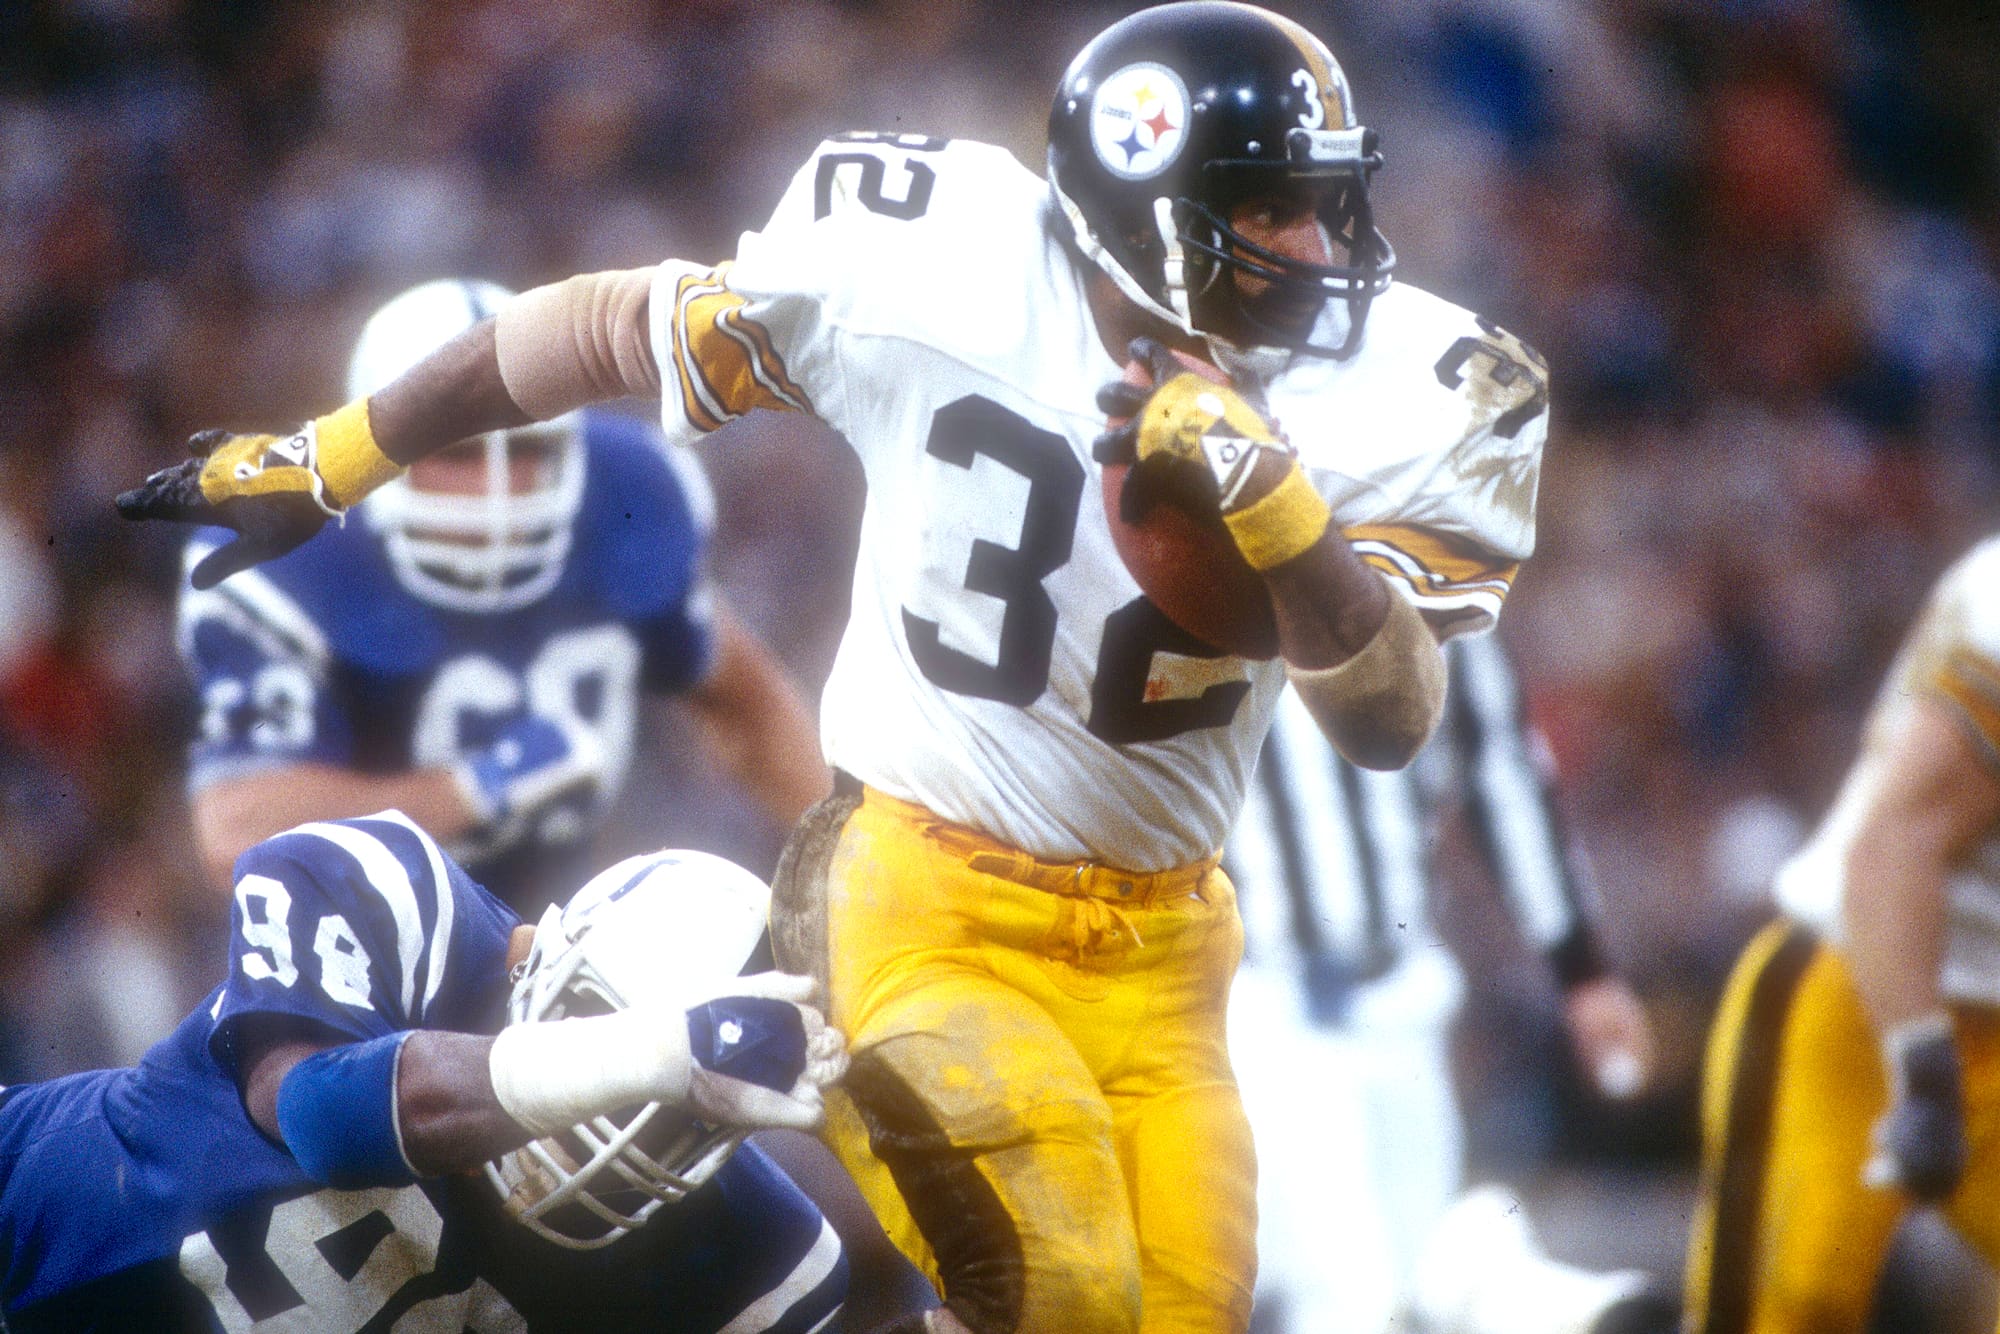 franco harris for the pittsburgh steelers